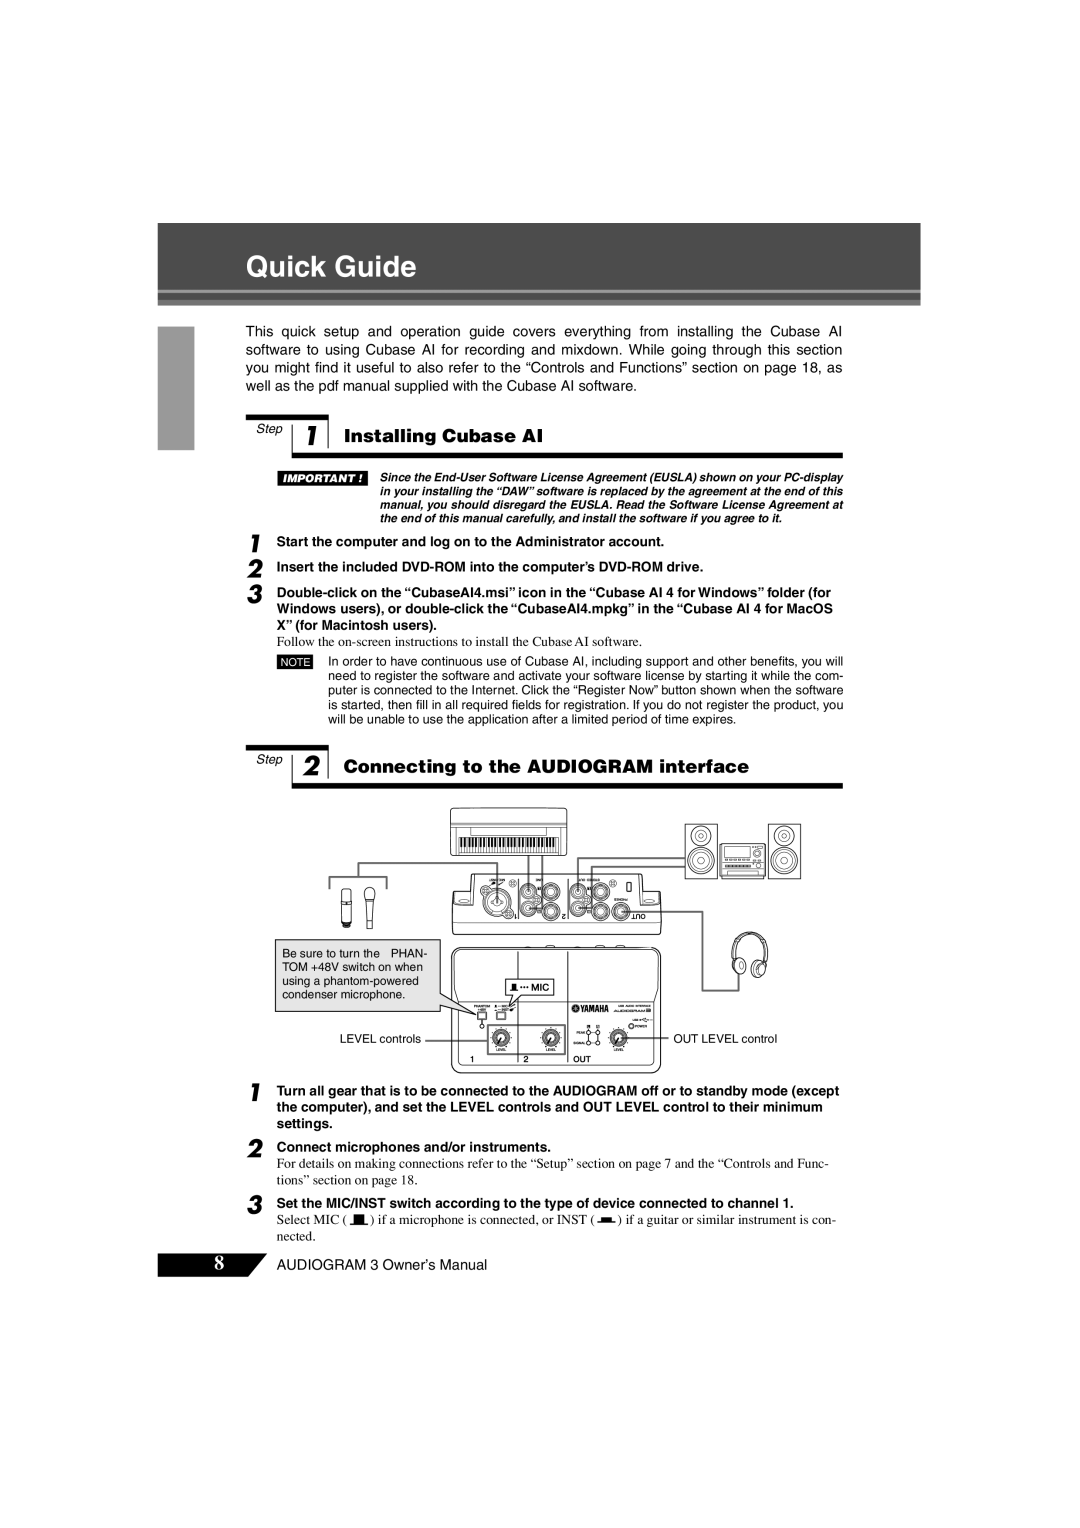 Yamaha Audiogram 3 owner manual Installing Cubase AI, Connecting to the AUDIOGRAM interface, Quick Guide 